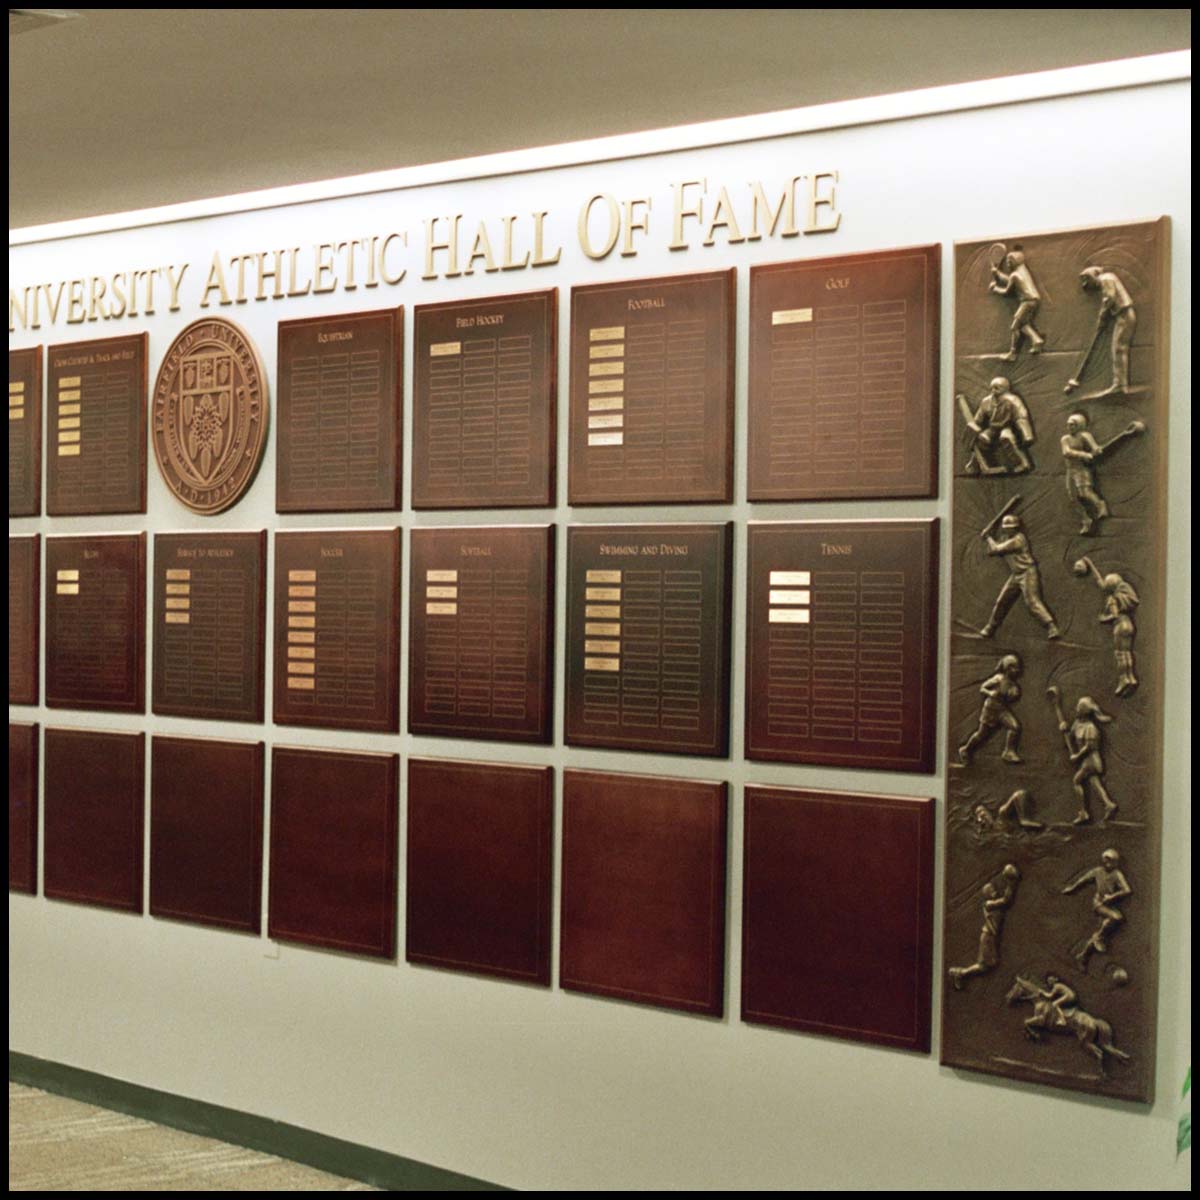 photo of white interior wall with rows of bronze-colored plaques with names on small gold-colored plaques with large bronze-colored relief of various athletes